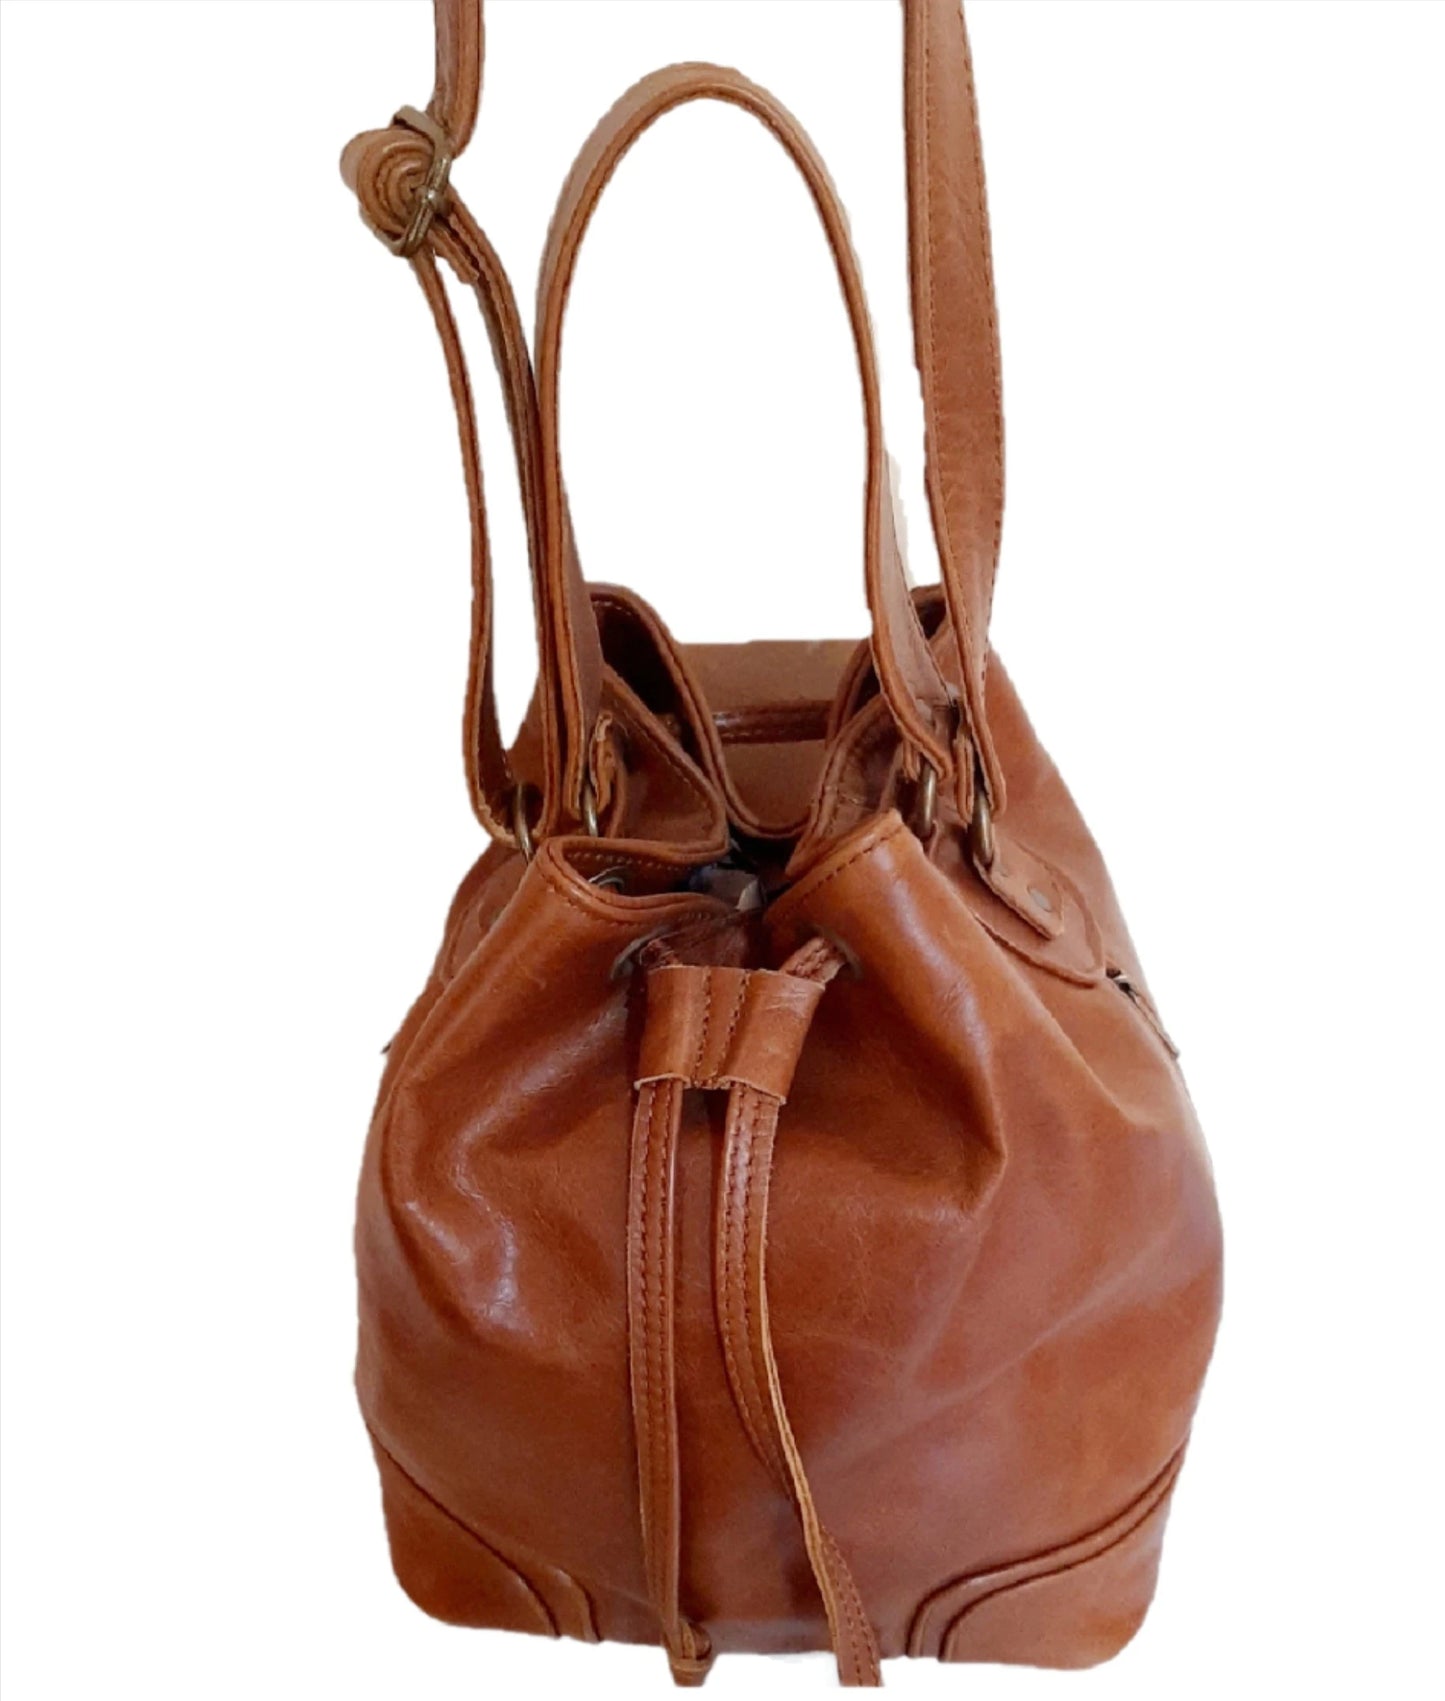 Tin bucket bags light tan is genuine leather hand made products by Cape Masai  Leather in Cape Town  South Africa.